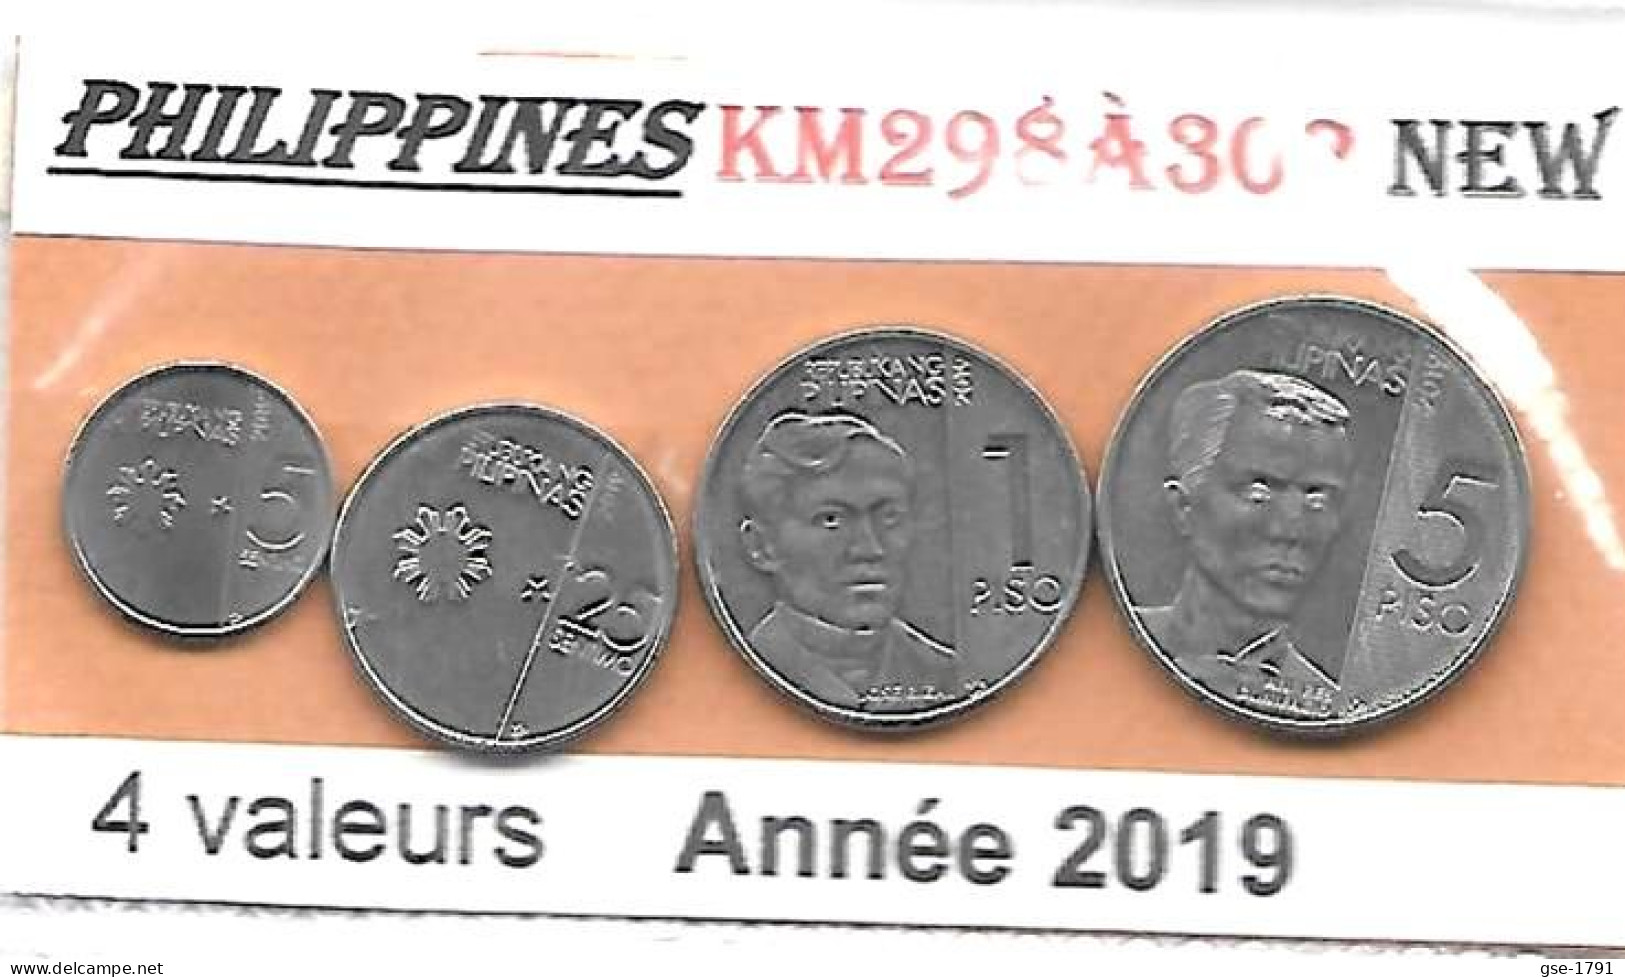 PHILIPPINES  Nouvelles Frappes  Année 2019      5, 25 Sentimo & 1, 5 Piso Neuf. - Philippines